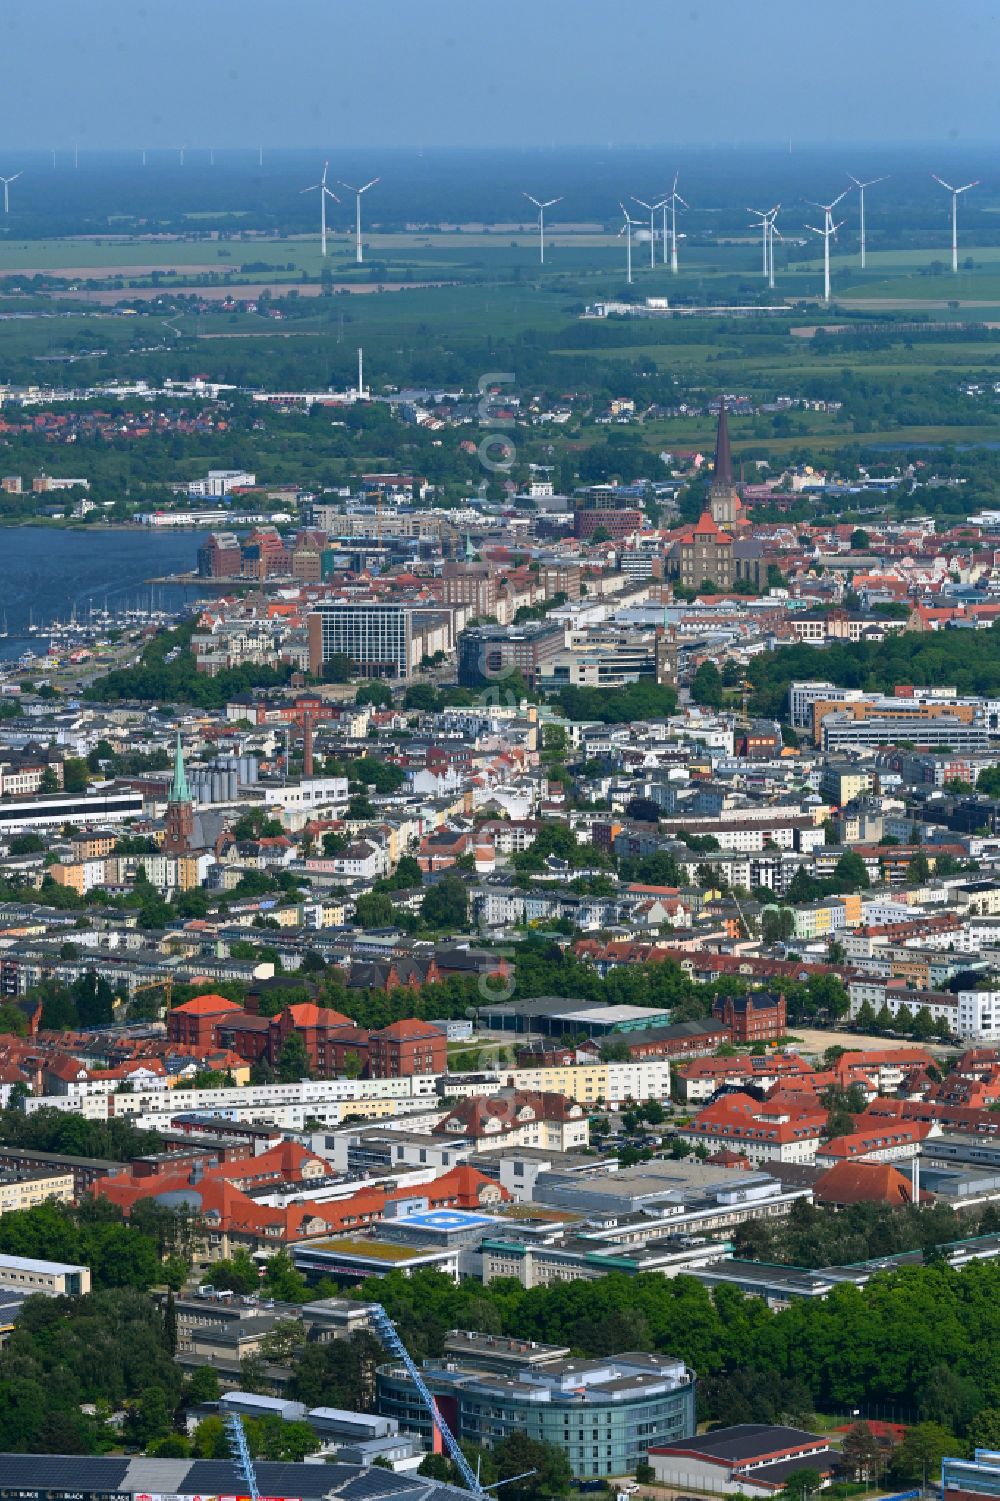 Rostock from above - Hospital grounds and campus of the University Hospital Universitaetsmedizin Rostock (UMR) with the new building complex Central Medical Functions (ZMF) on Ernst-Heydemann-Strasse in Rostock on the Baltic Sea coast in the state of Mecklenburg-Vorpommern, Germany